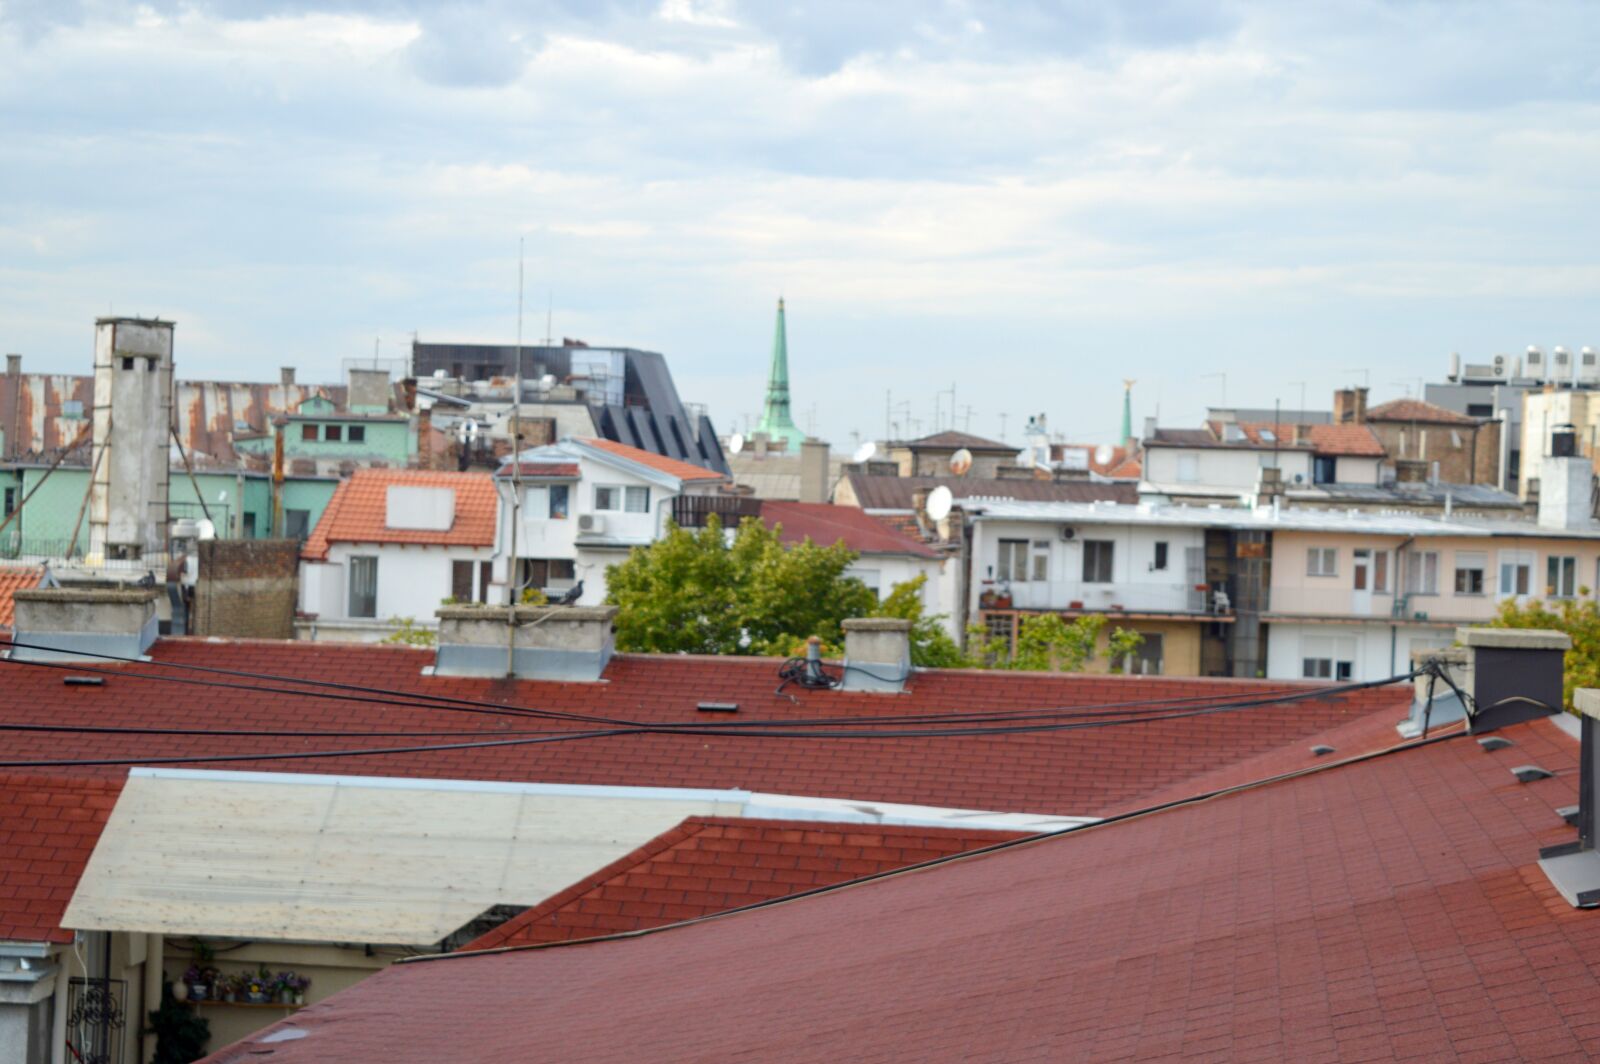 Nikon D3200 sample photo. "City, roofs, architecture" photography